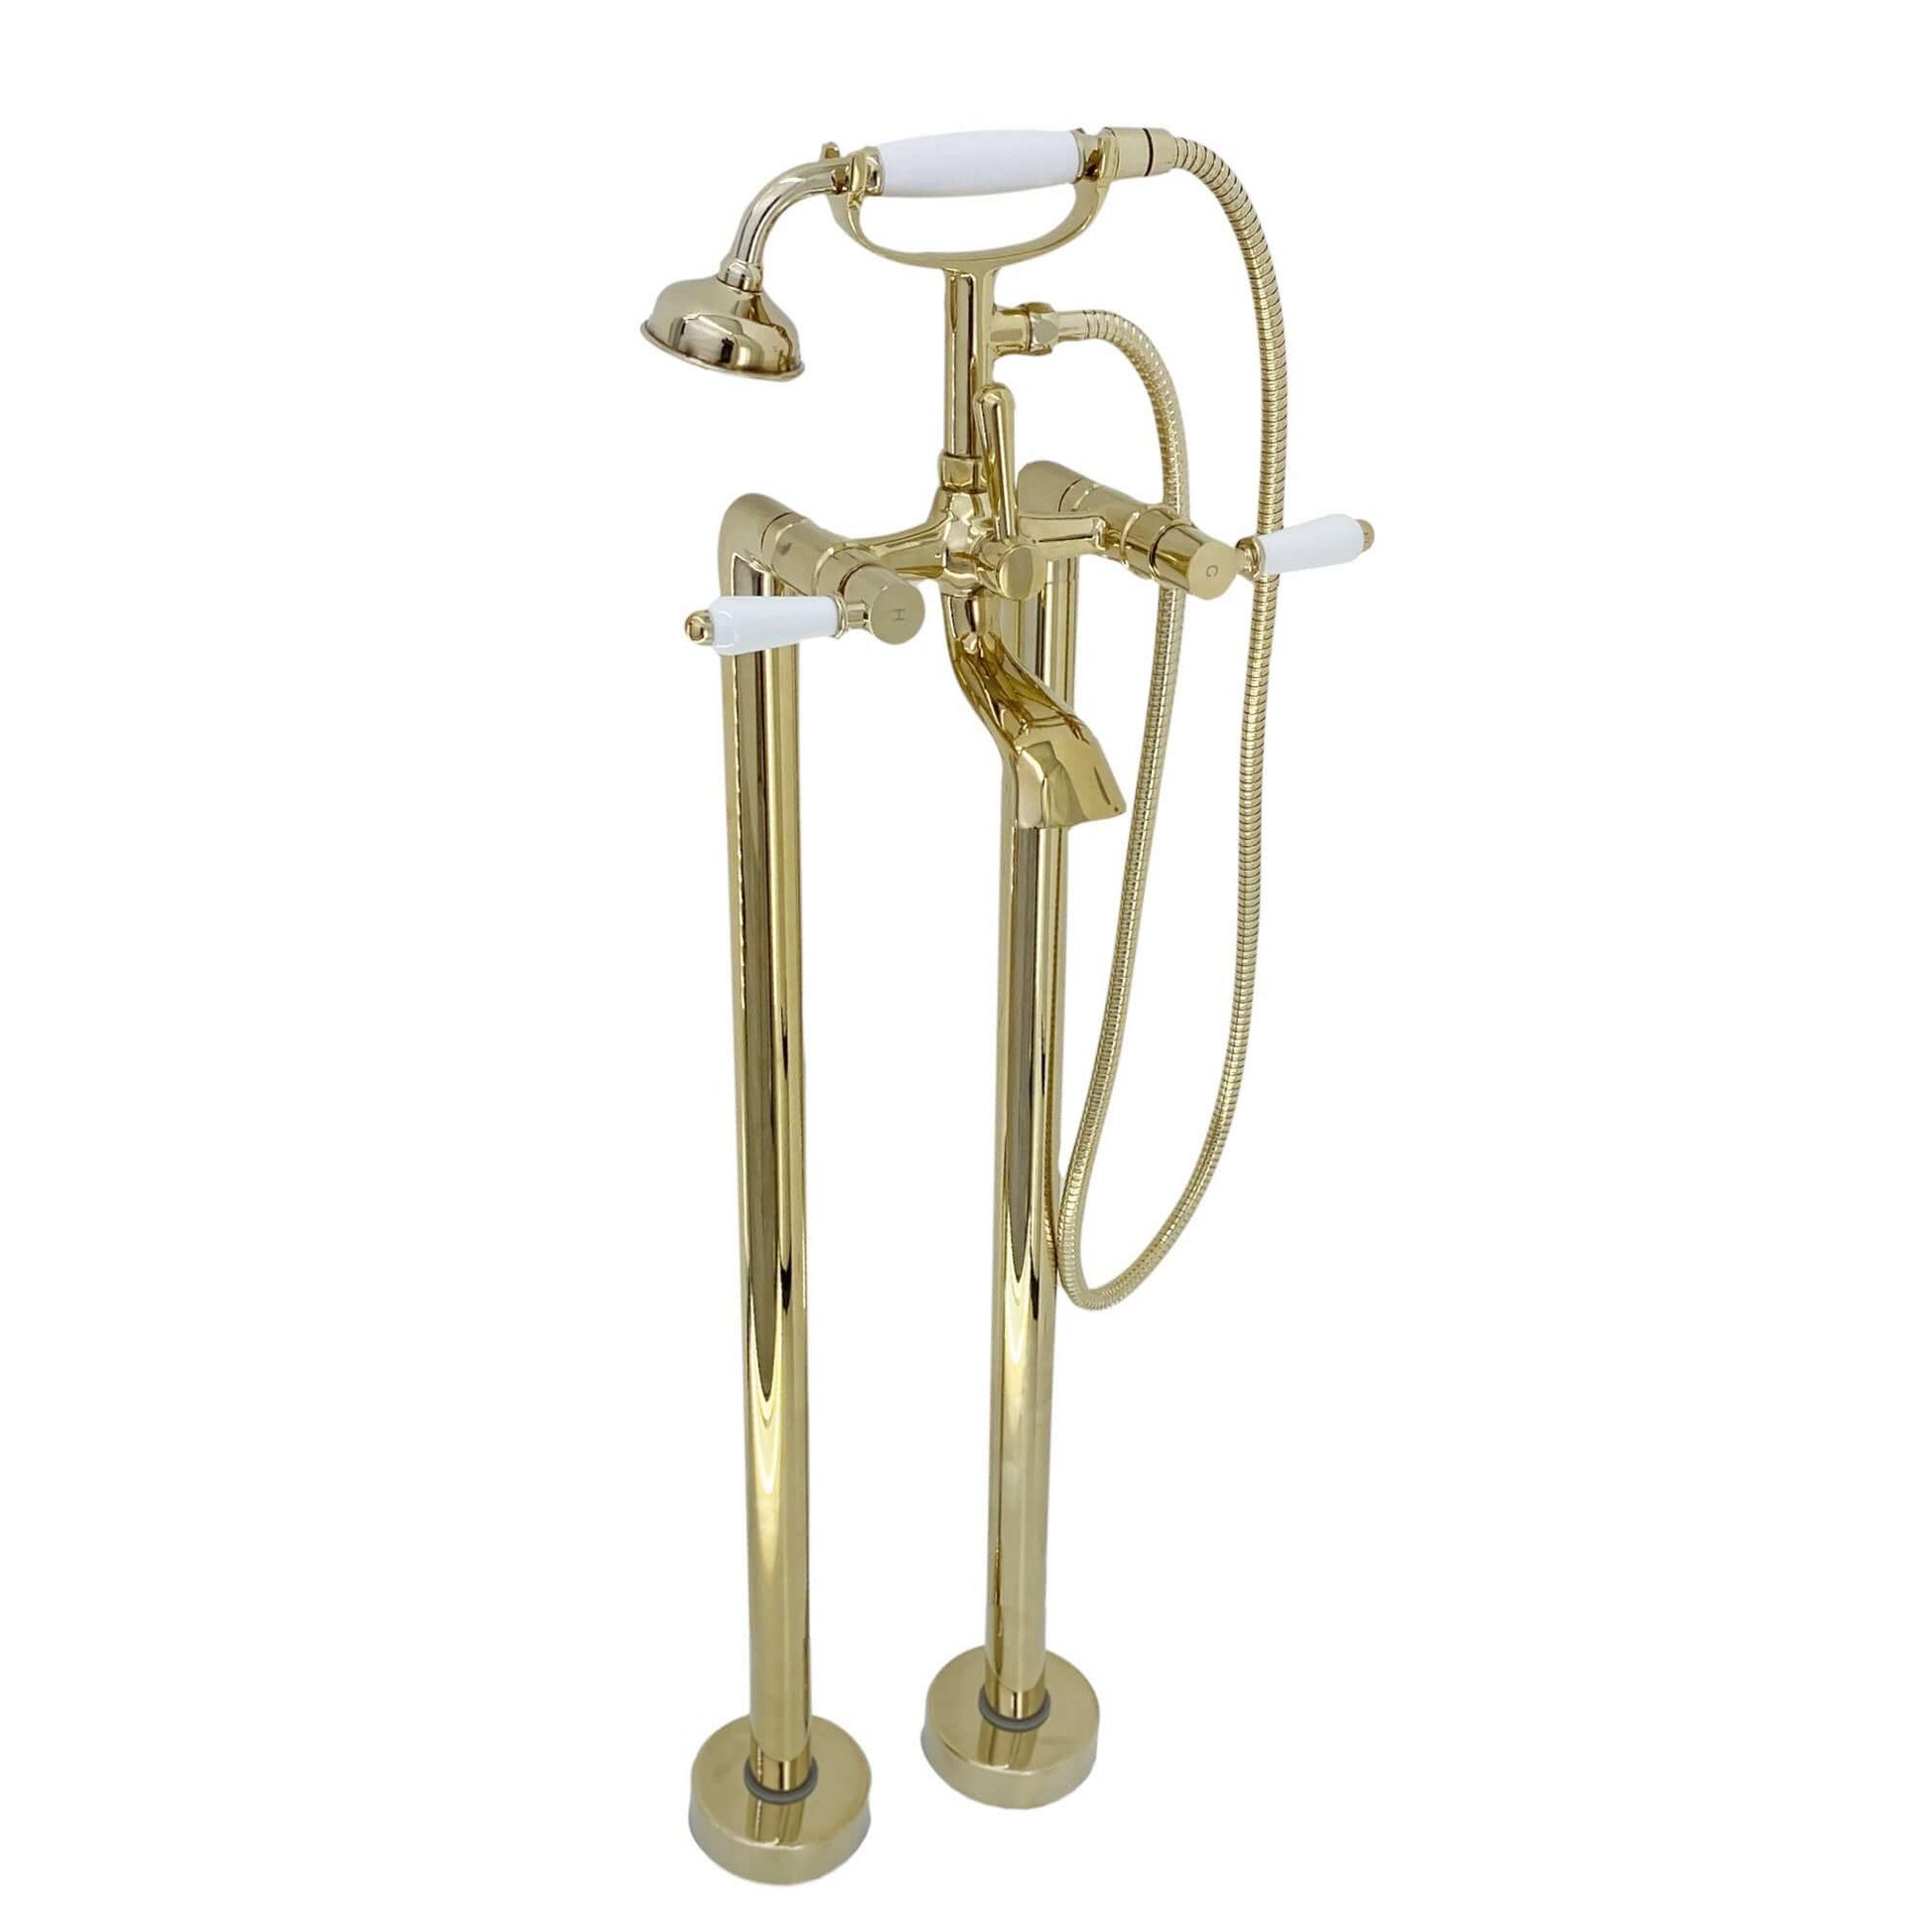 Downton floorstanding bath shower mixer tap with white ceramic levers - English gold - Taps